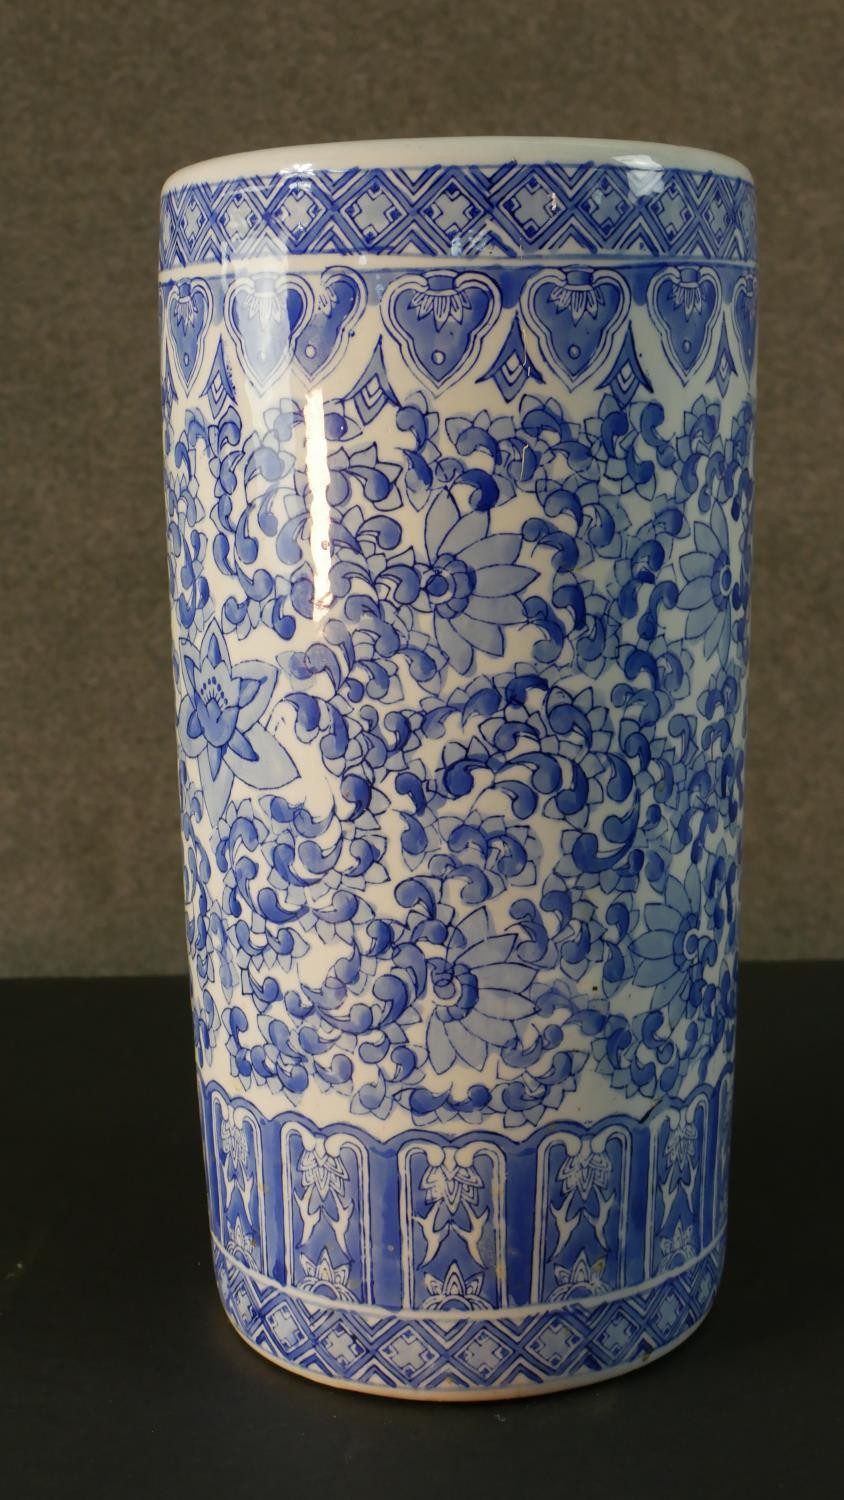 A vintage blue and white Chinese ceramic stylised floral design umbrella stand. Printed character